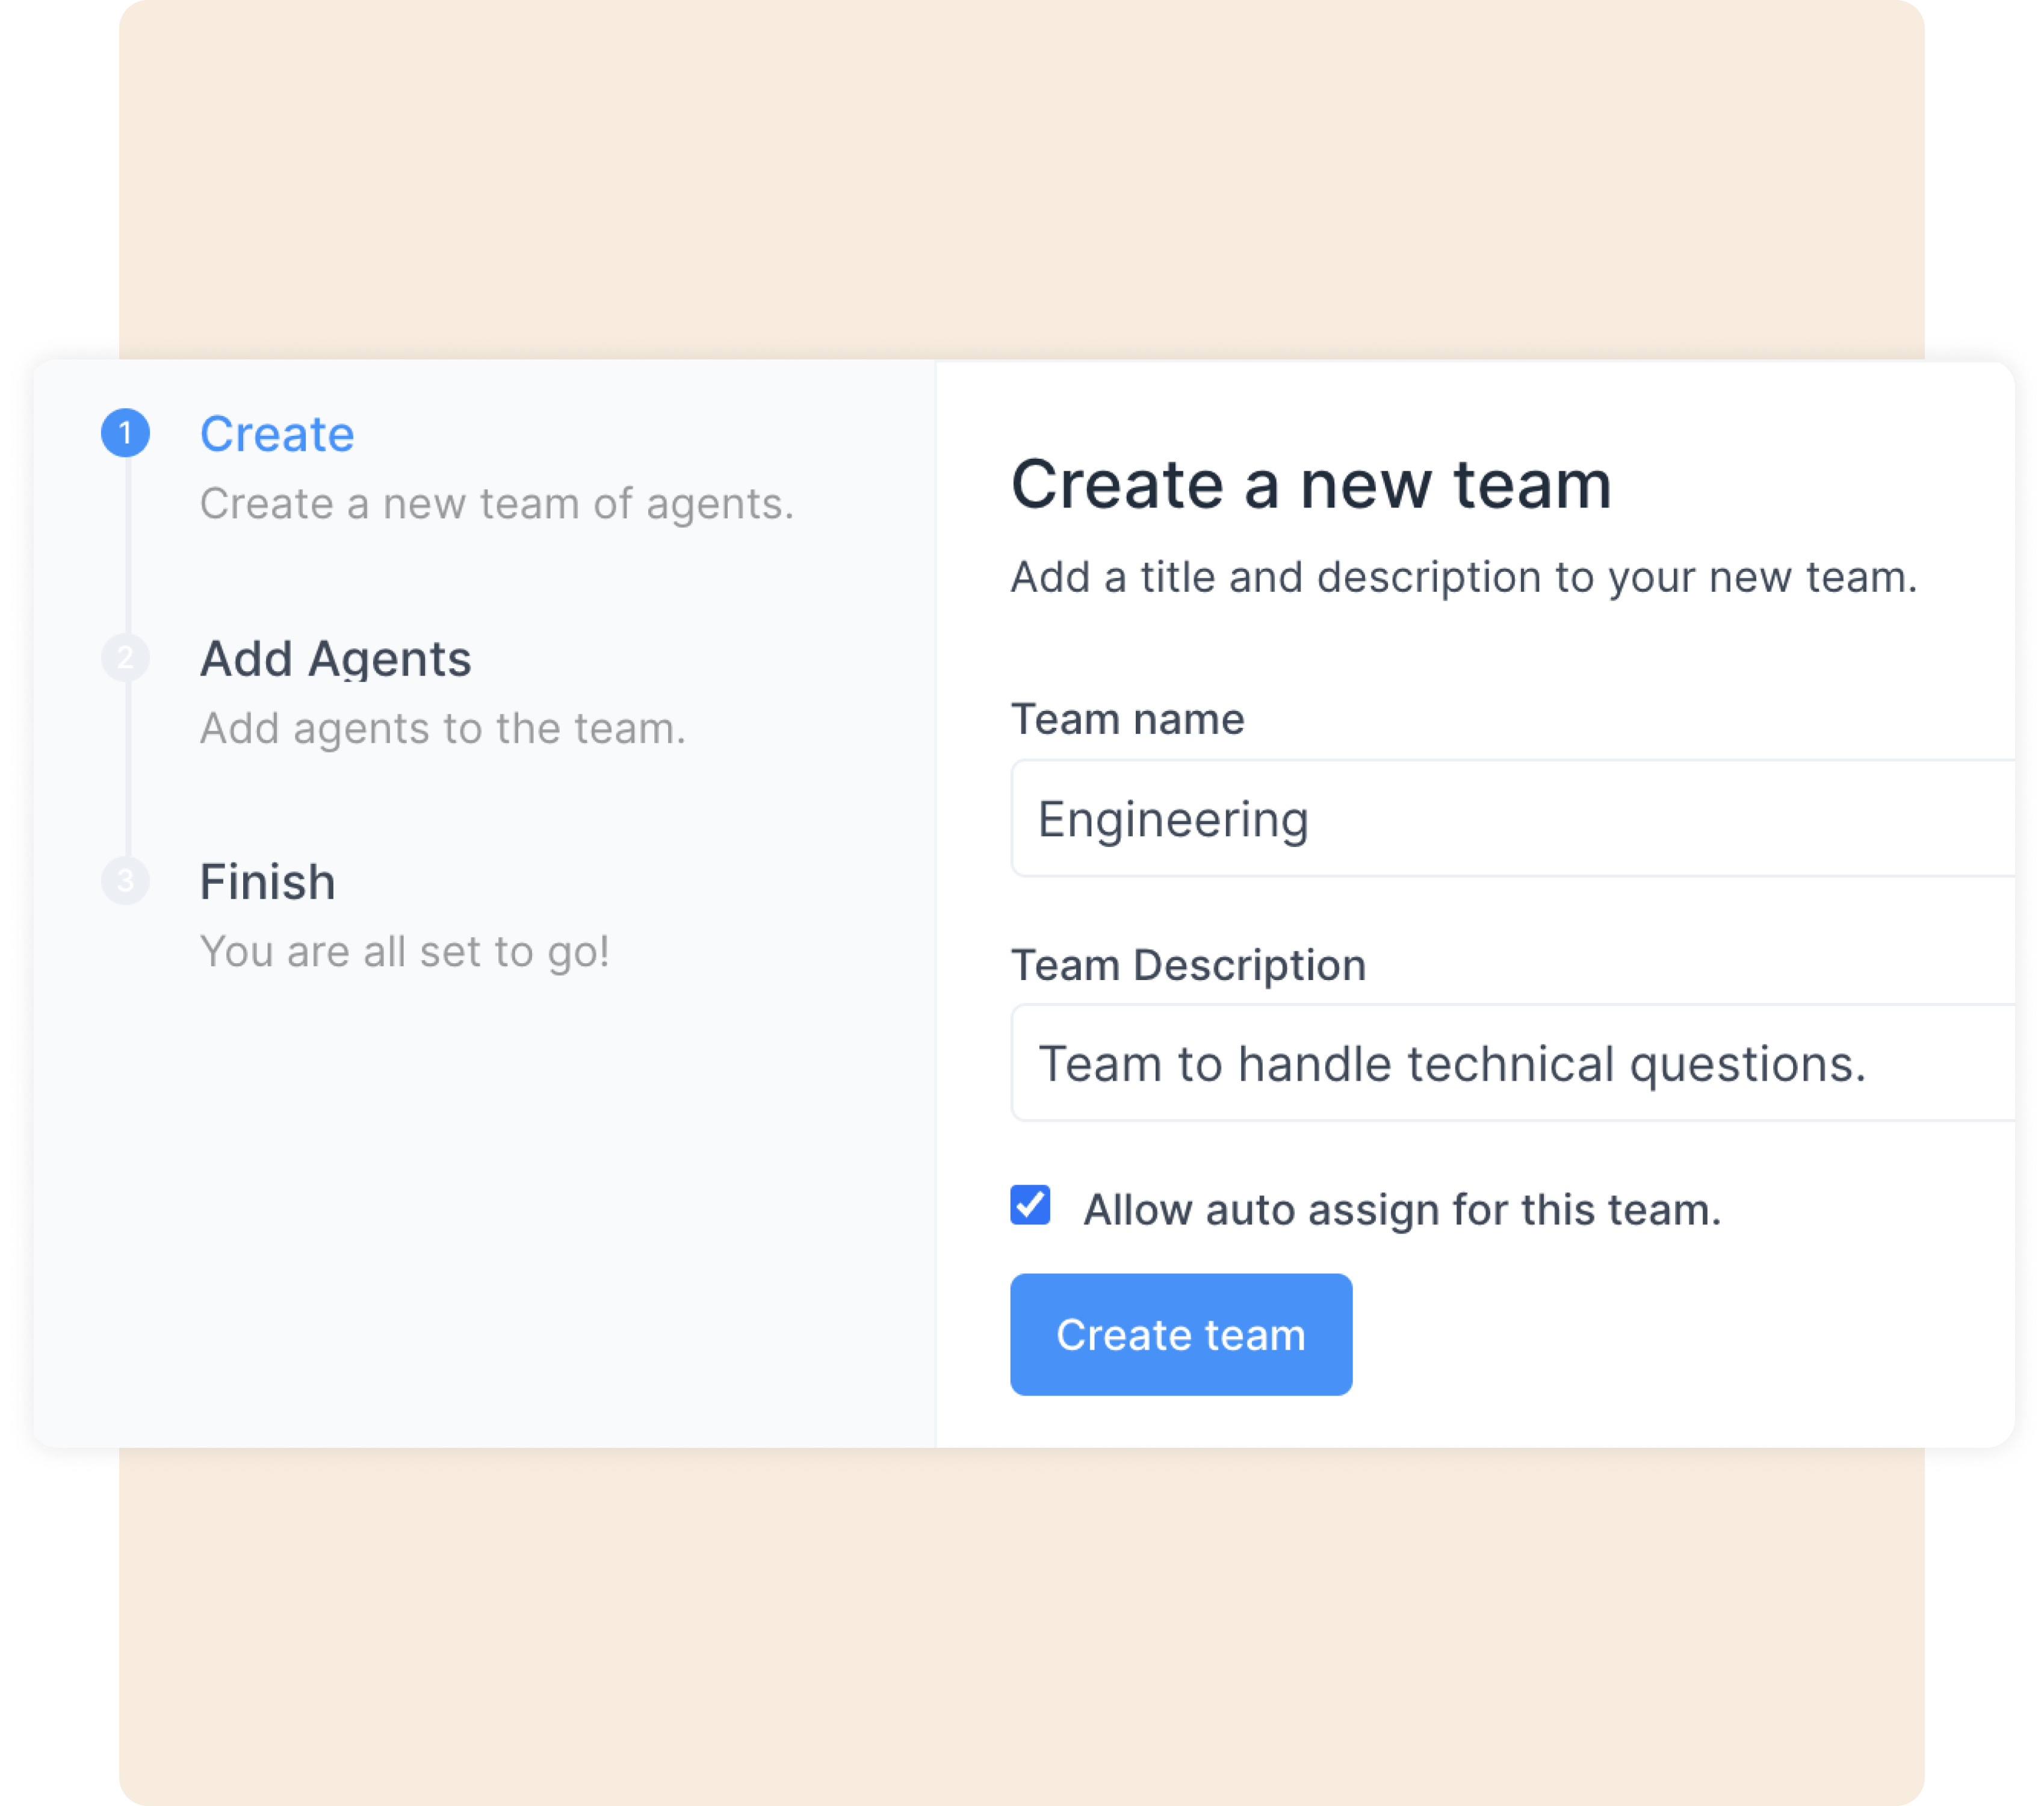 Set up your teams in seconds